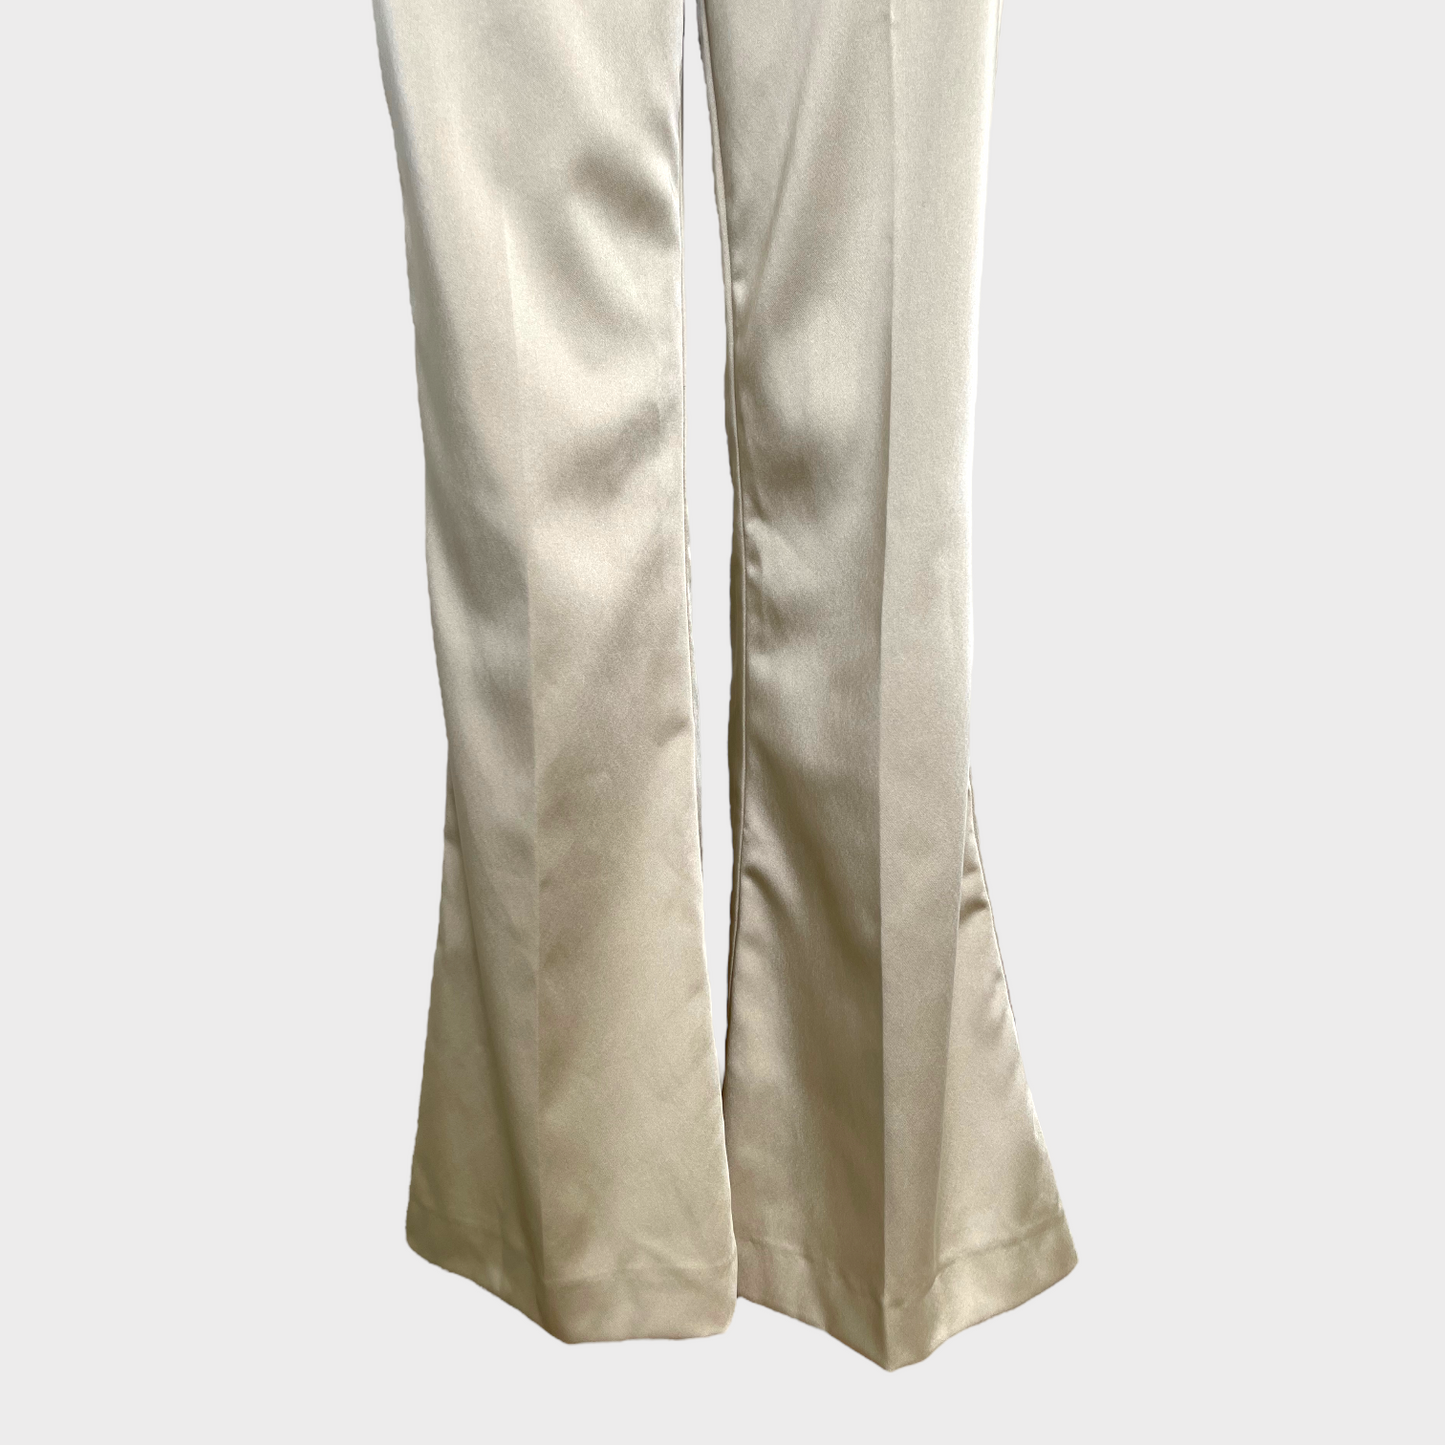 Reiss Mae Satin High-Rise Vintage Flare Retro Champagne Trousers Women's Size 2